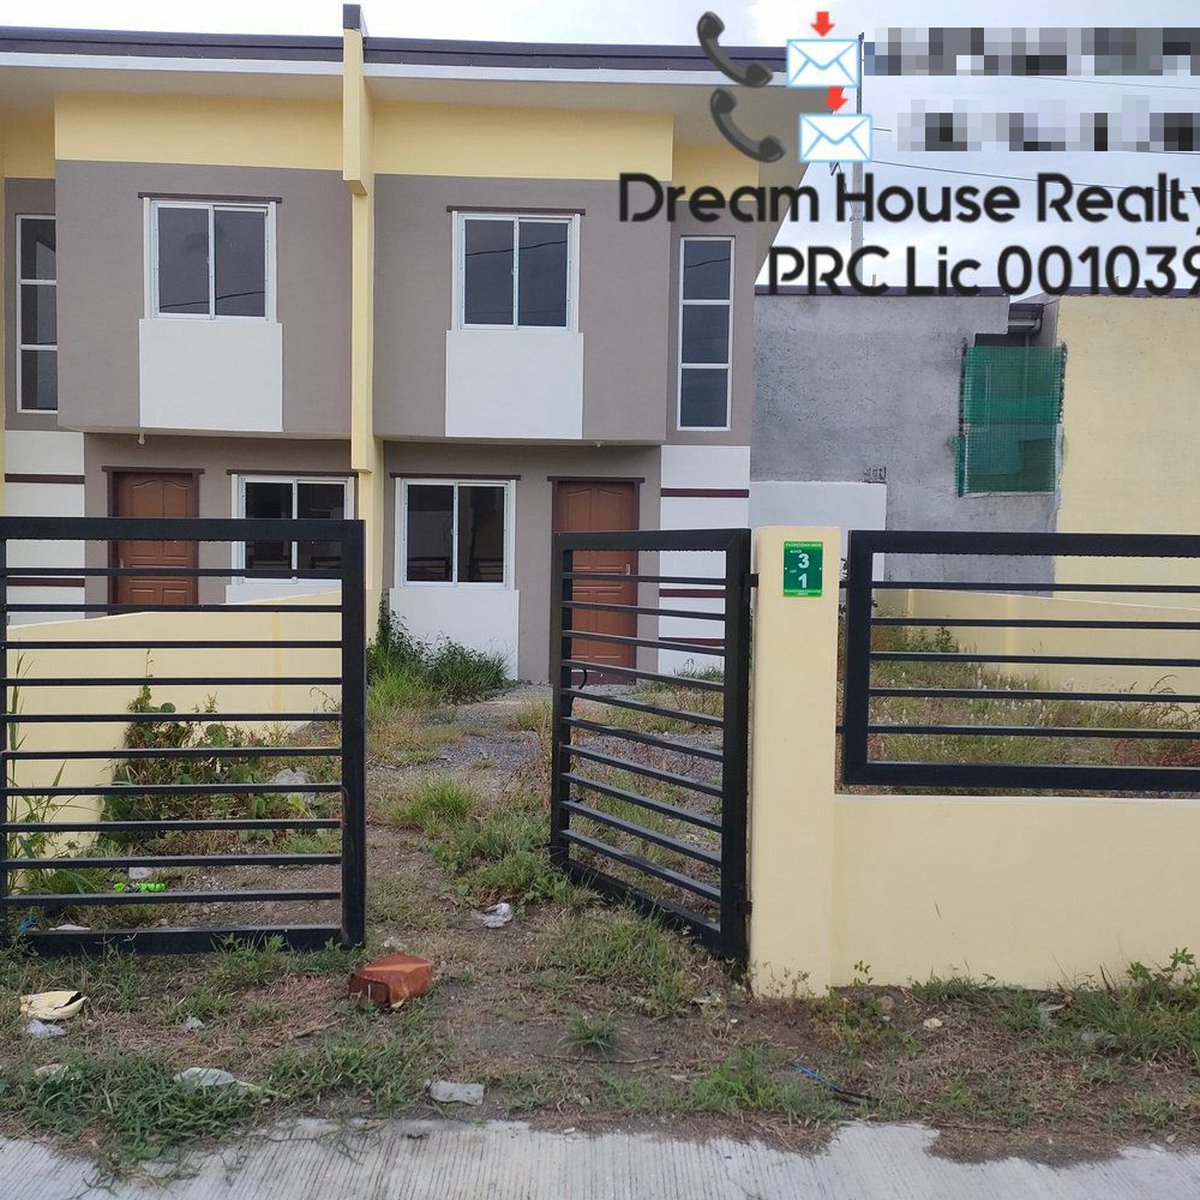 Pre-selling 2-bedroom Townhouse For Sale thru Pag-IBIG